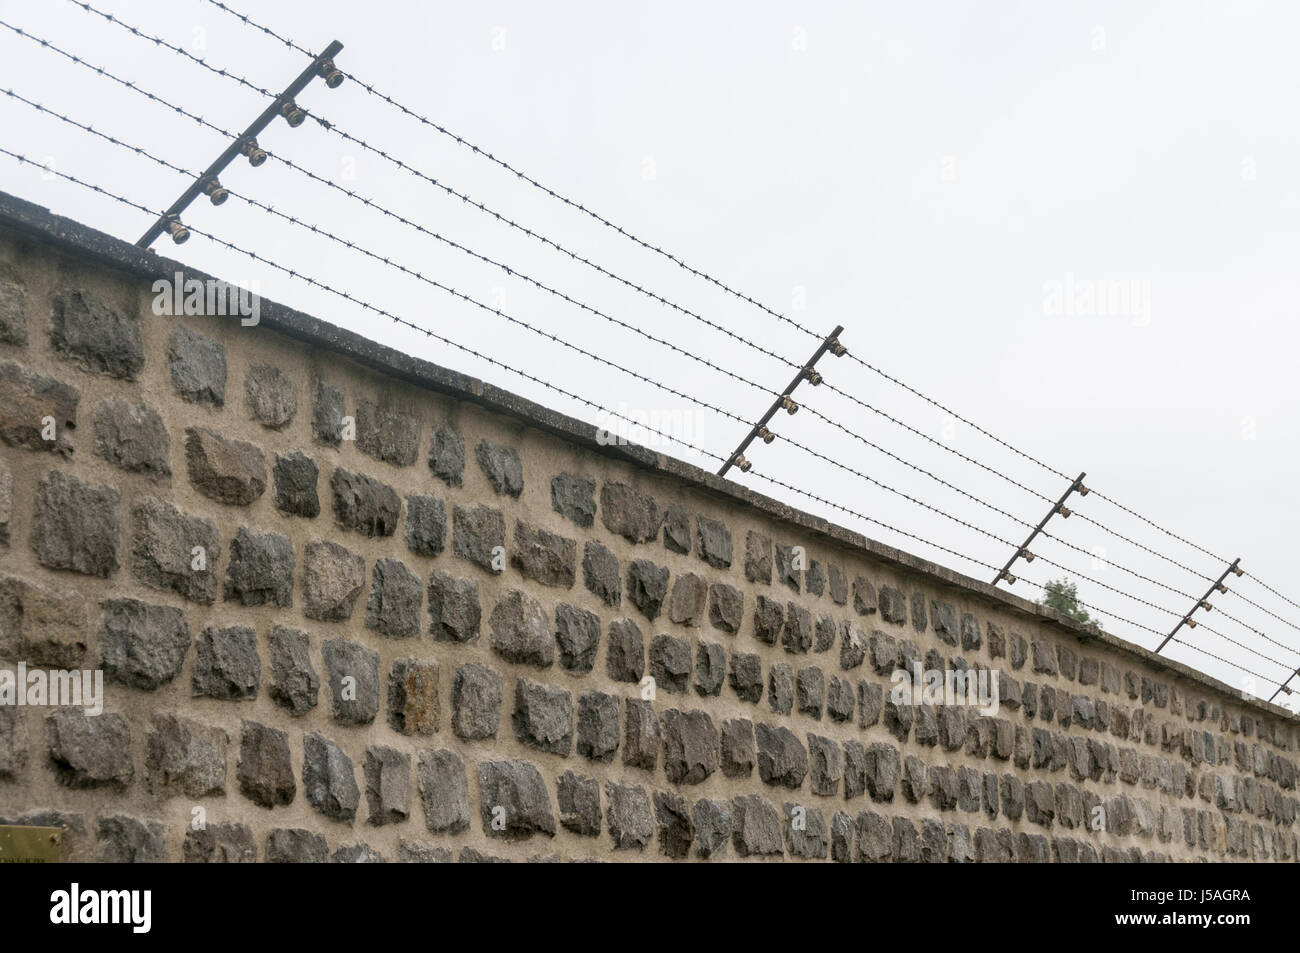 Austria, Mauthausen, Mauthausen Memorial Jewish concentration camp, electrified fence, liberated by US Army in 1945 Stock Photo